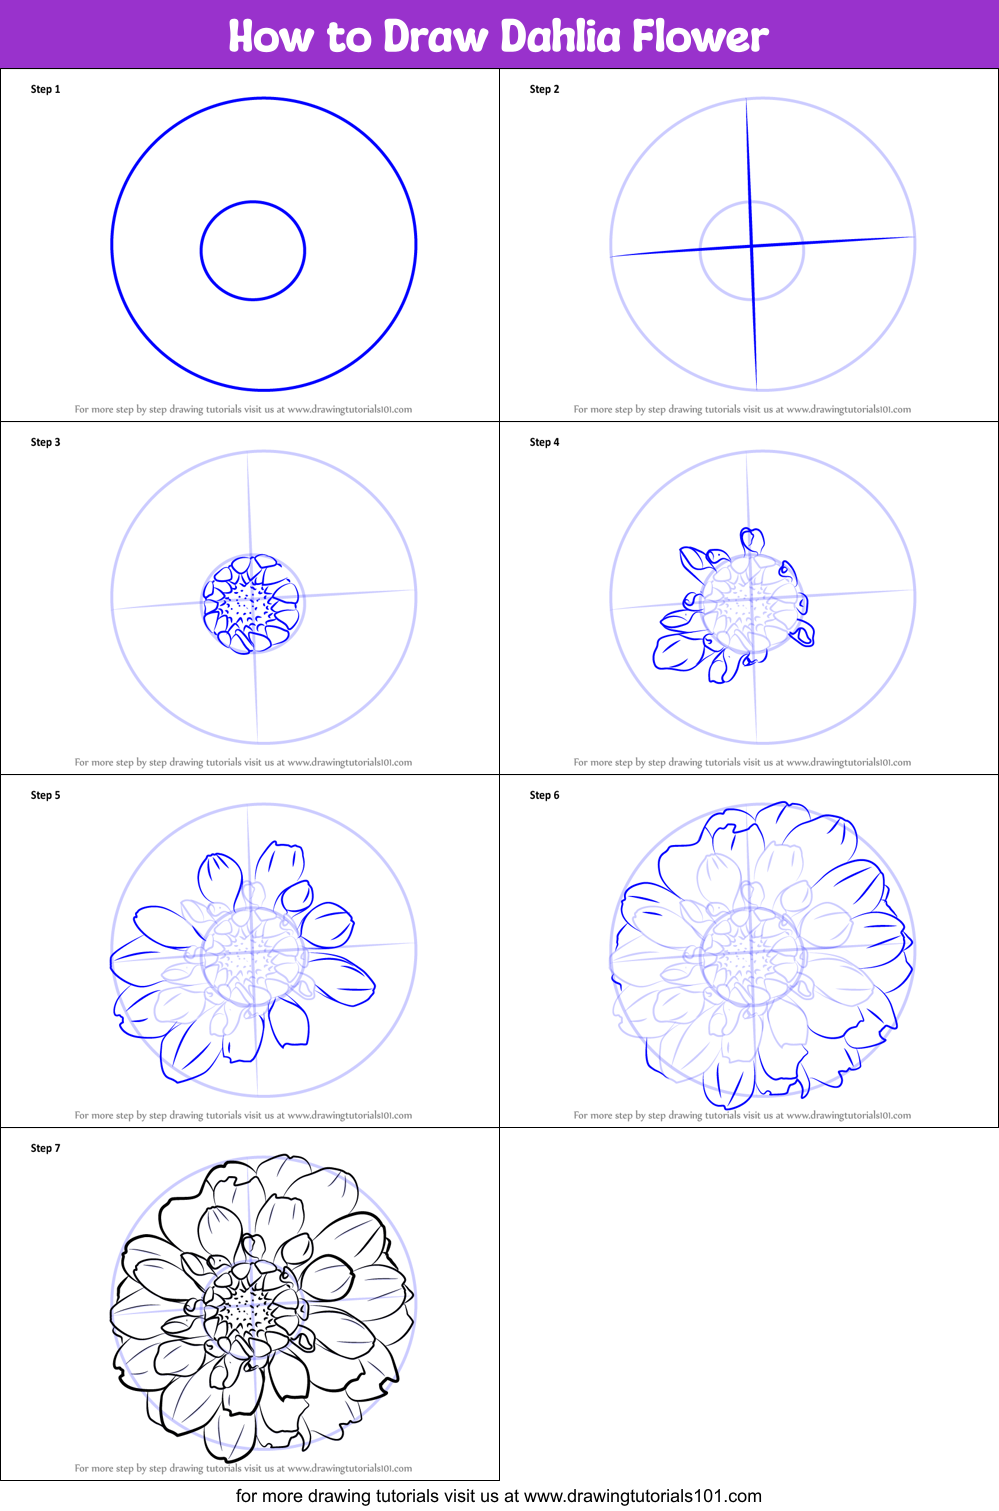 How to Draw Dahlia Flower printable step by step drawing sheet